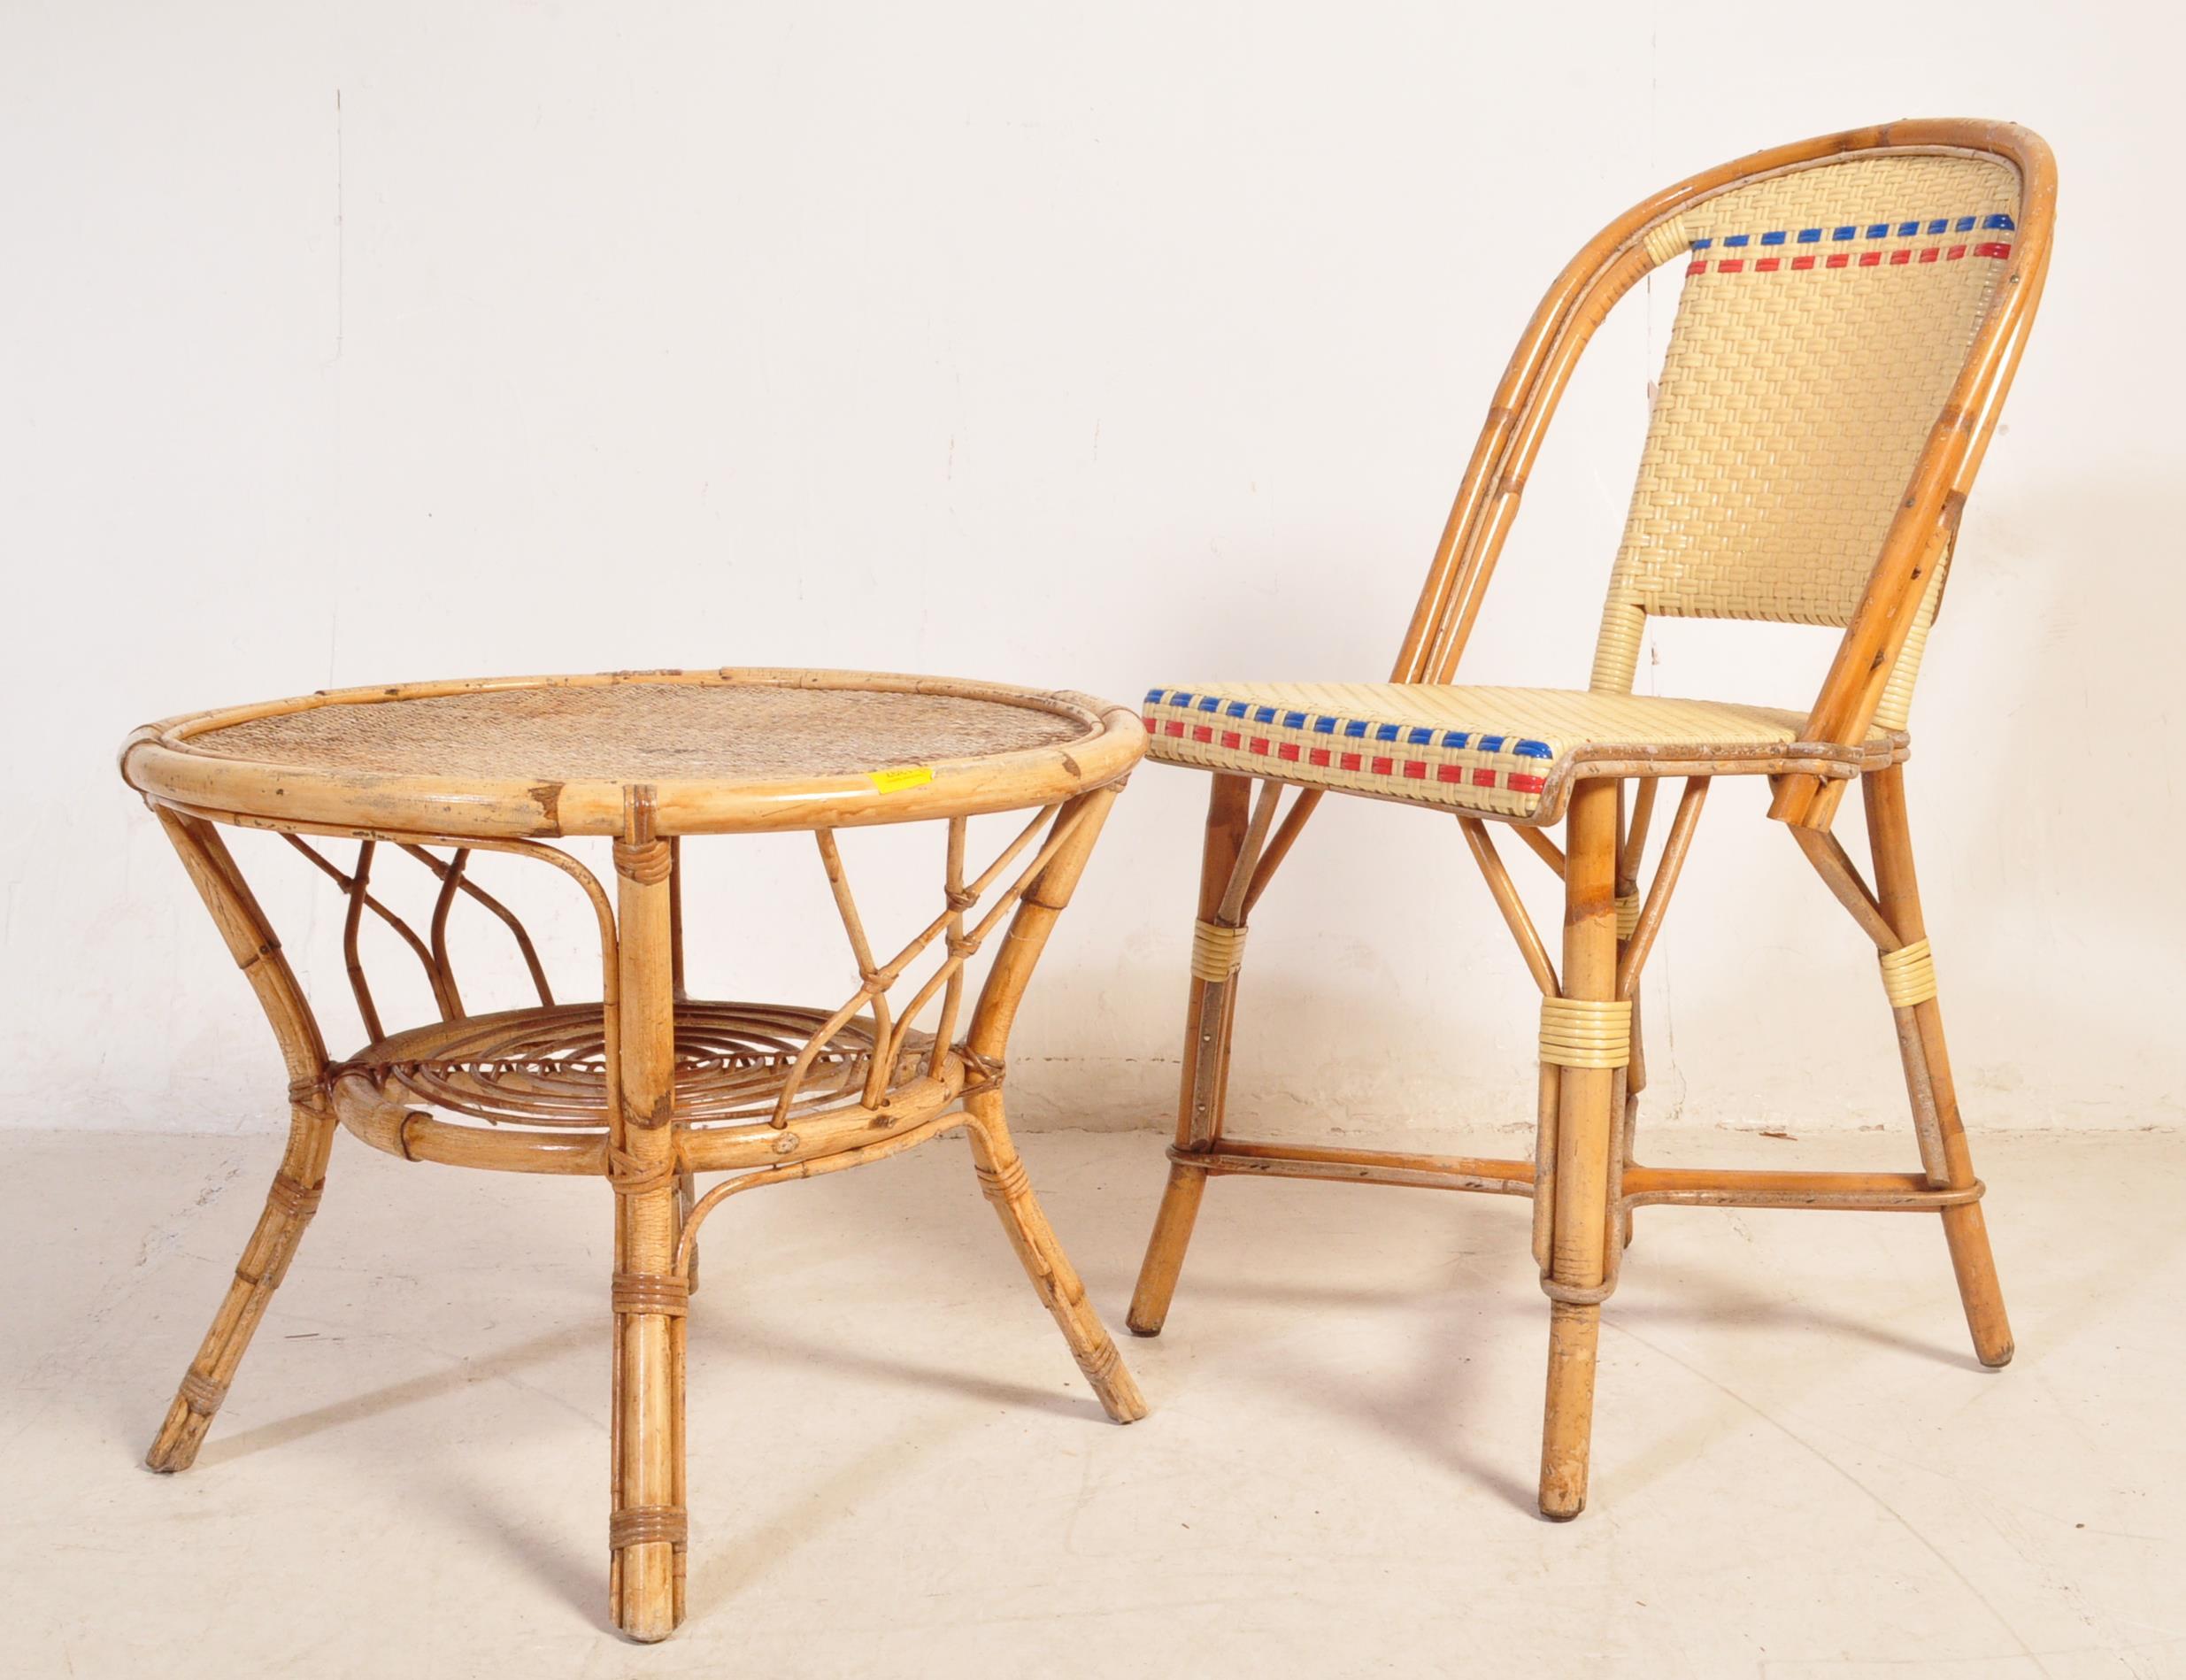 VINTAGE MID CENTURY BAMBOO TABLE & CHAIR